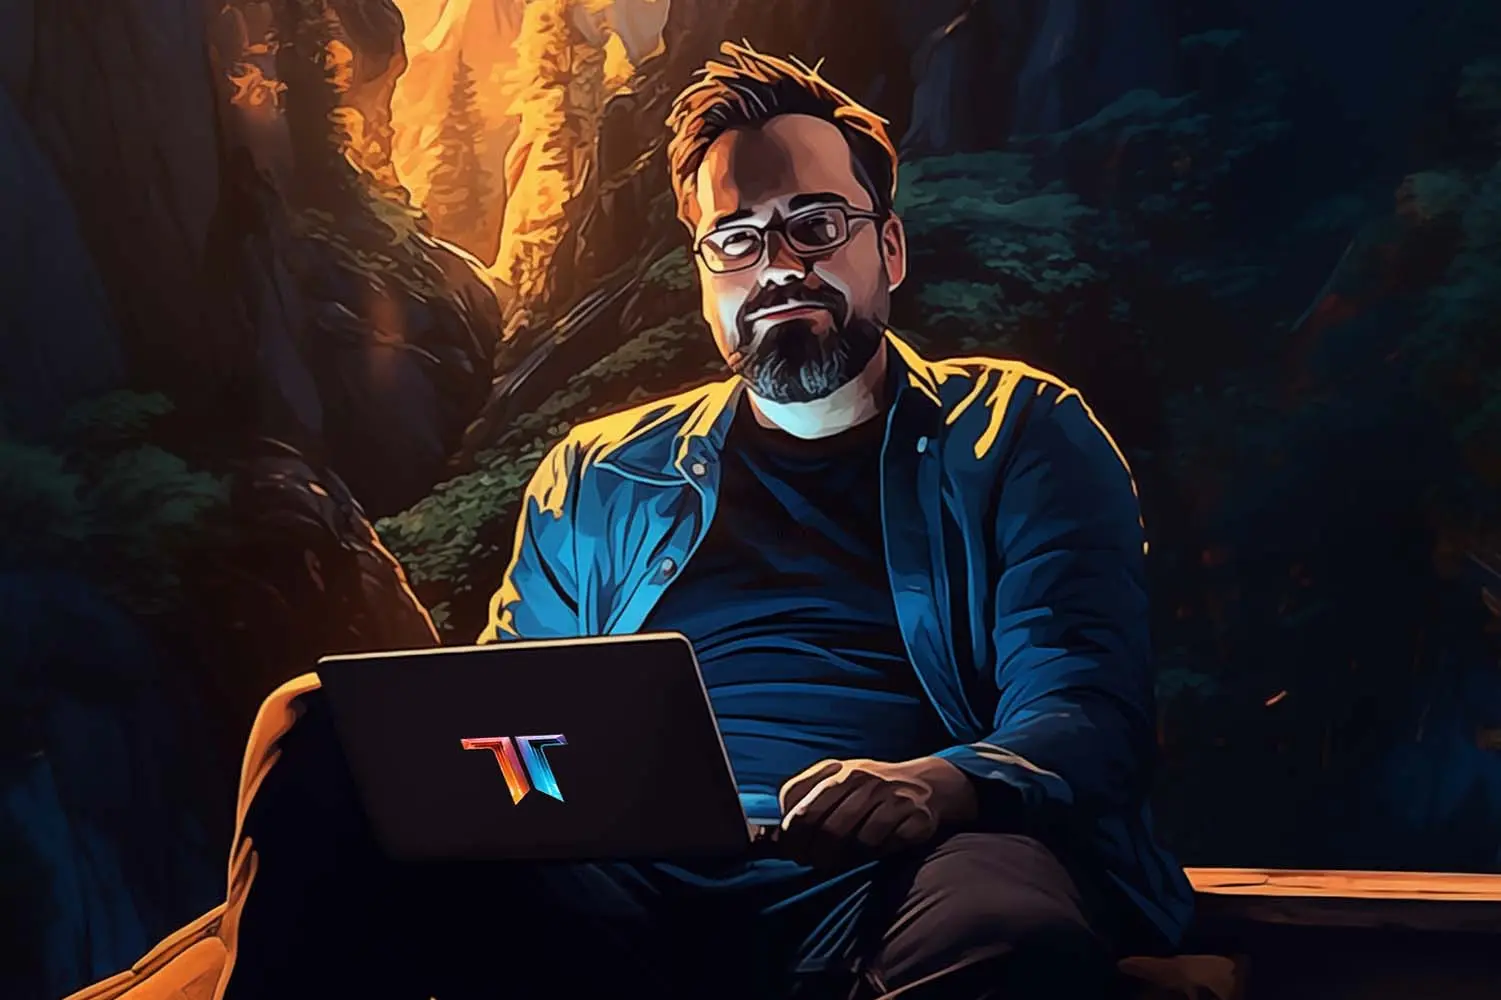 Ted sitting at a computer in Nature